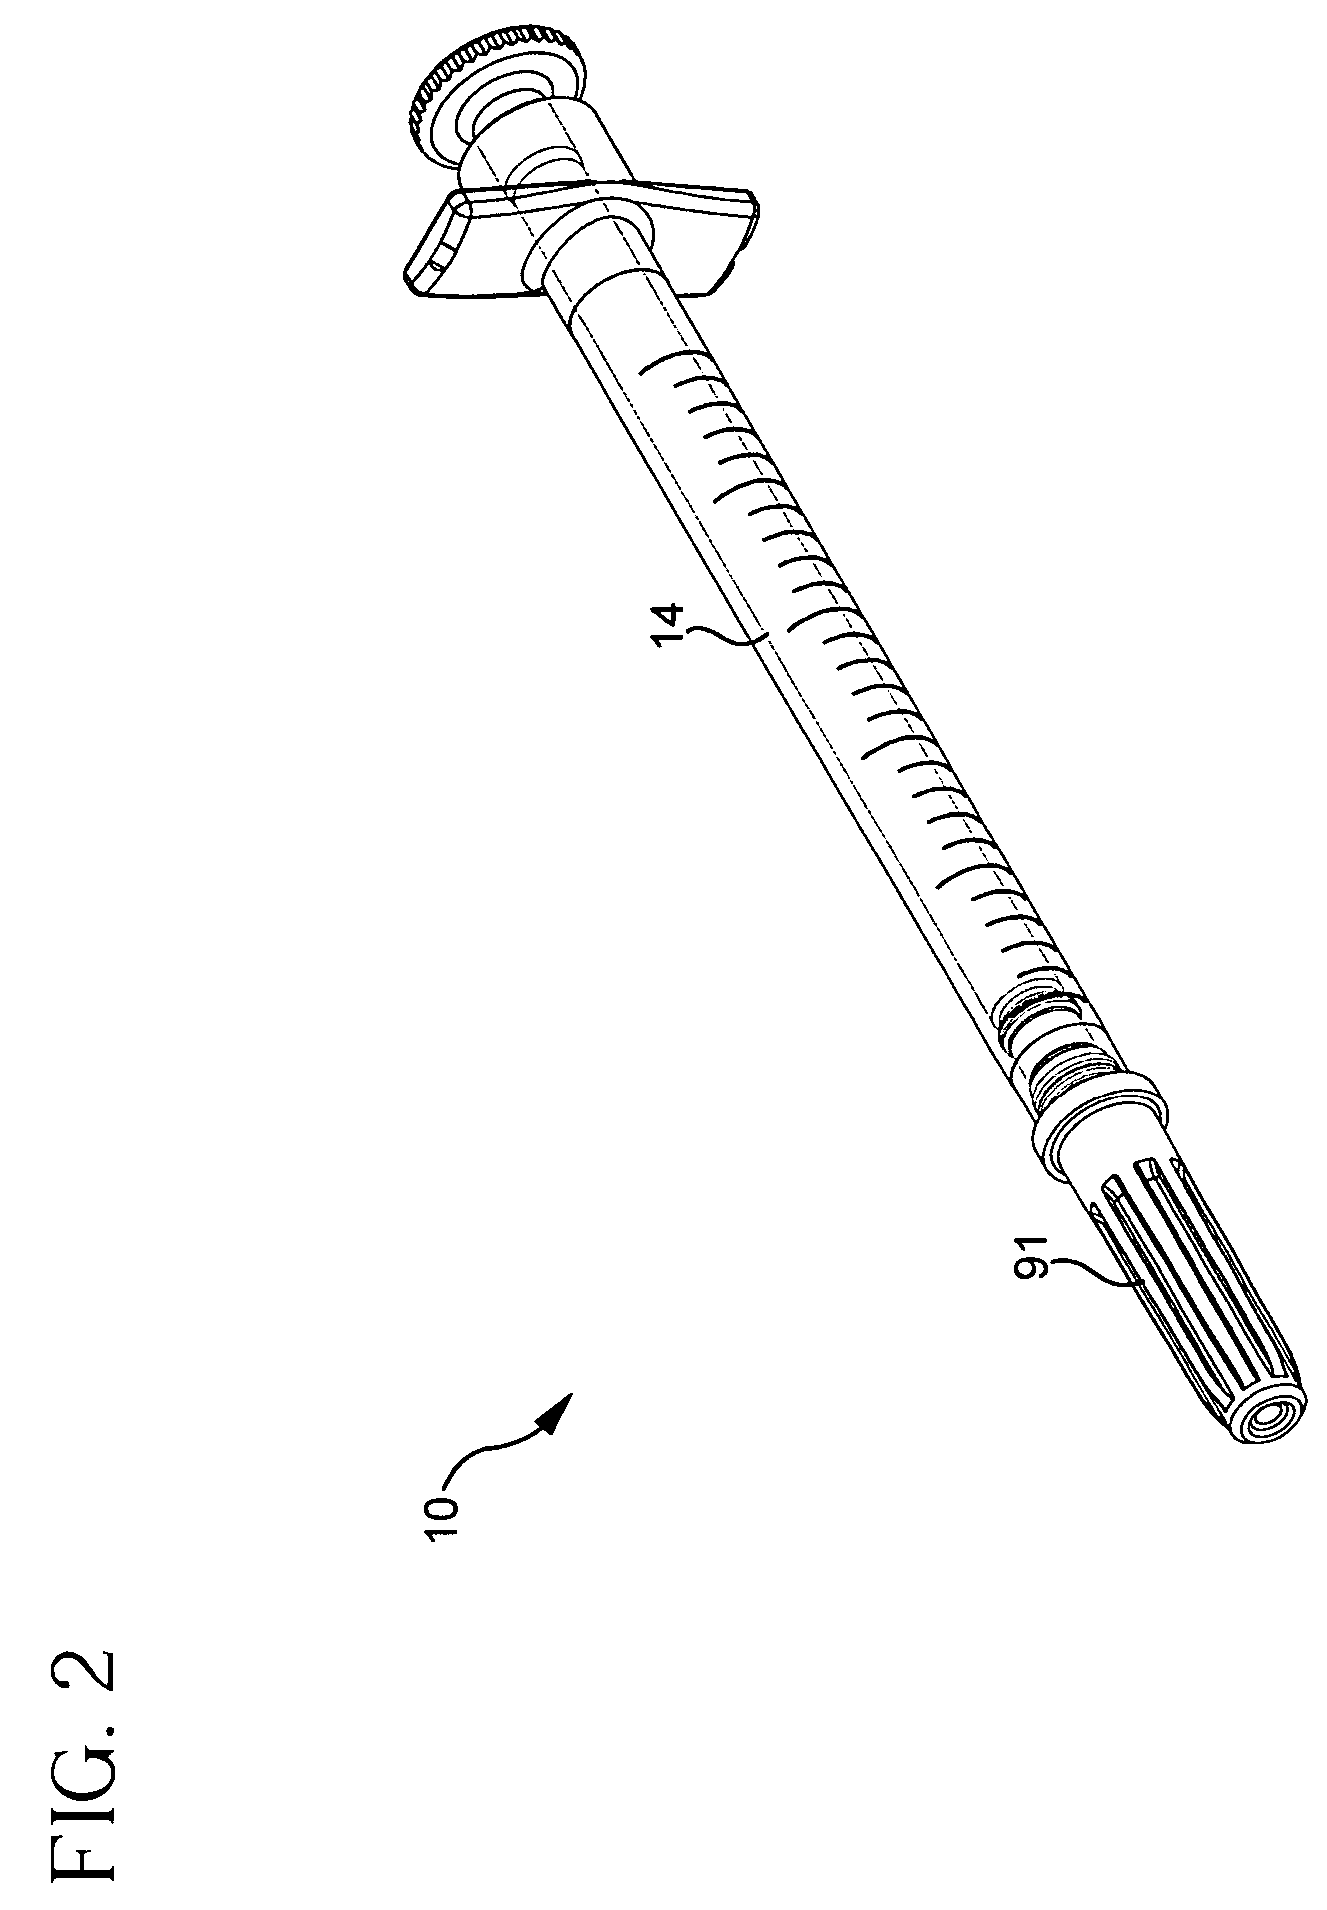 Plunger for retracting needle syringe